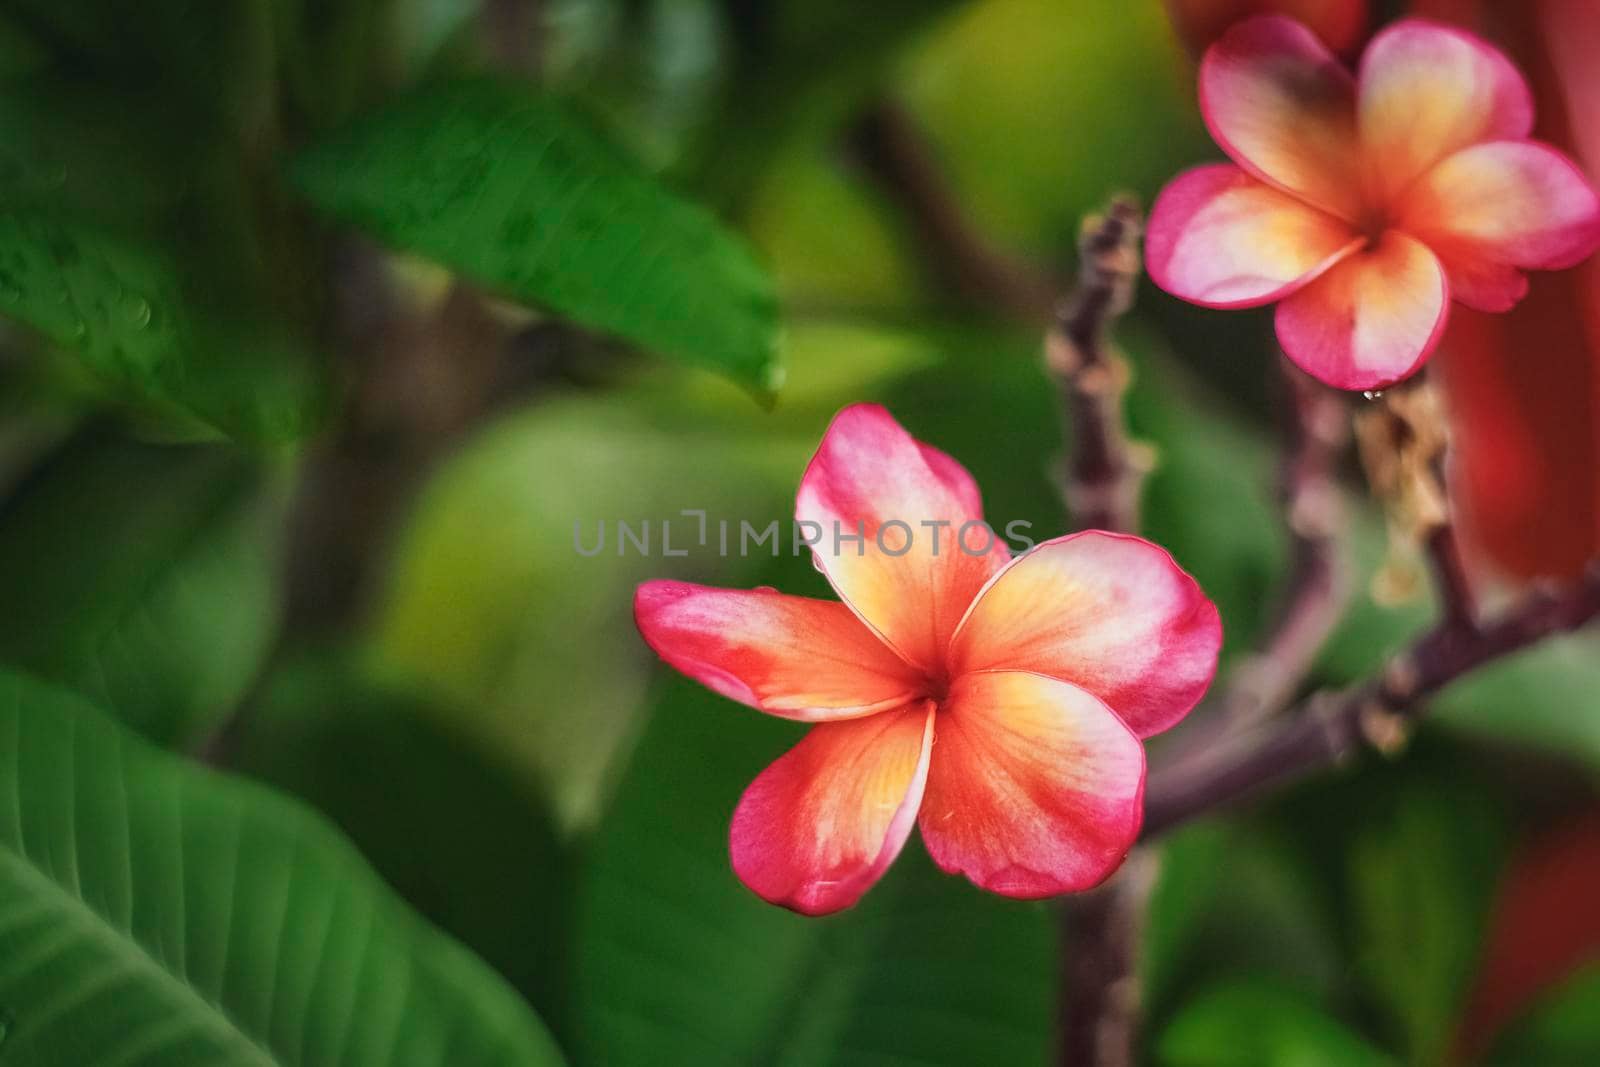 Pink Flower over green leaf background abstract relax holiday summer vacation nature concept